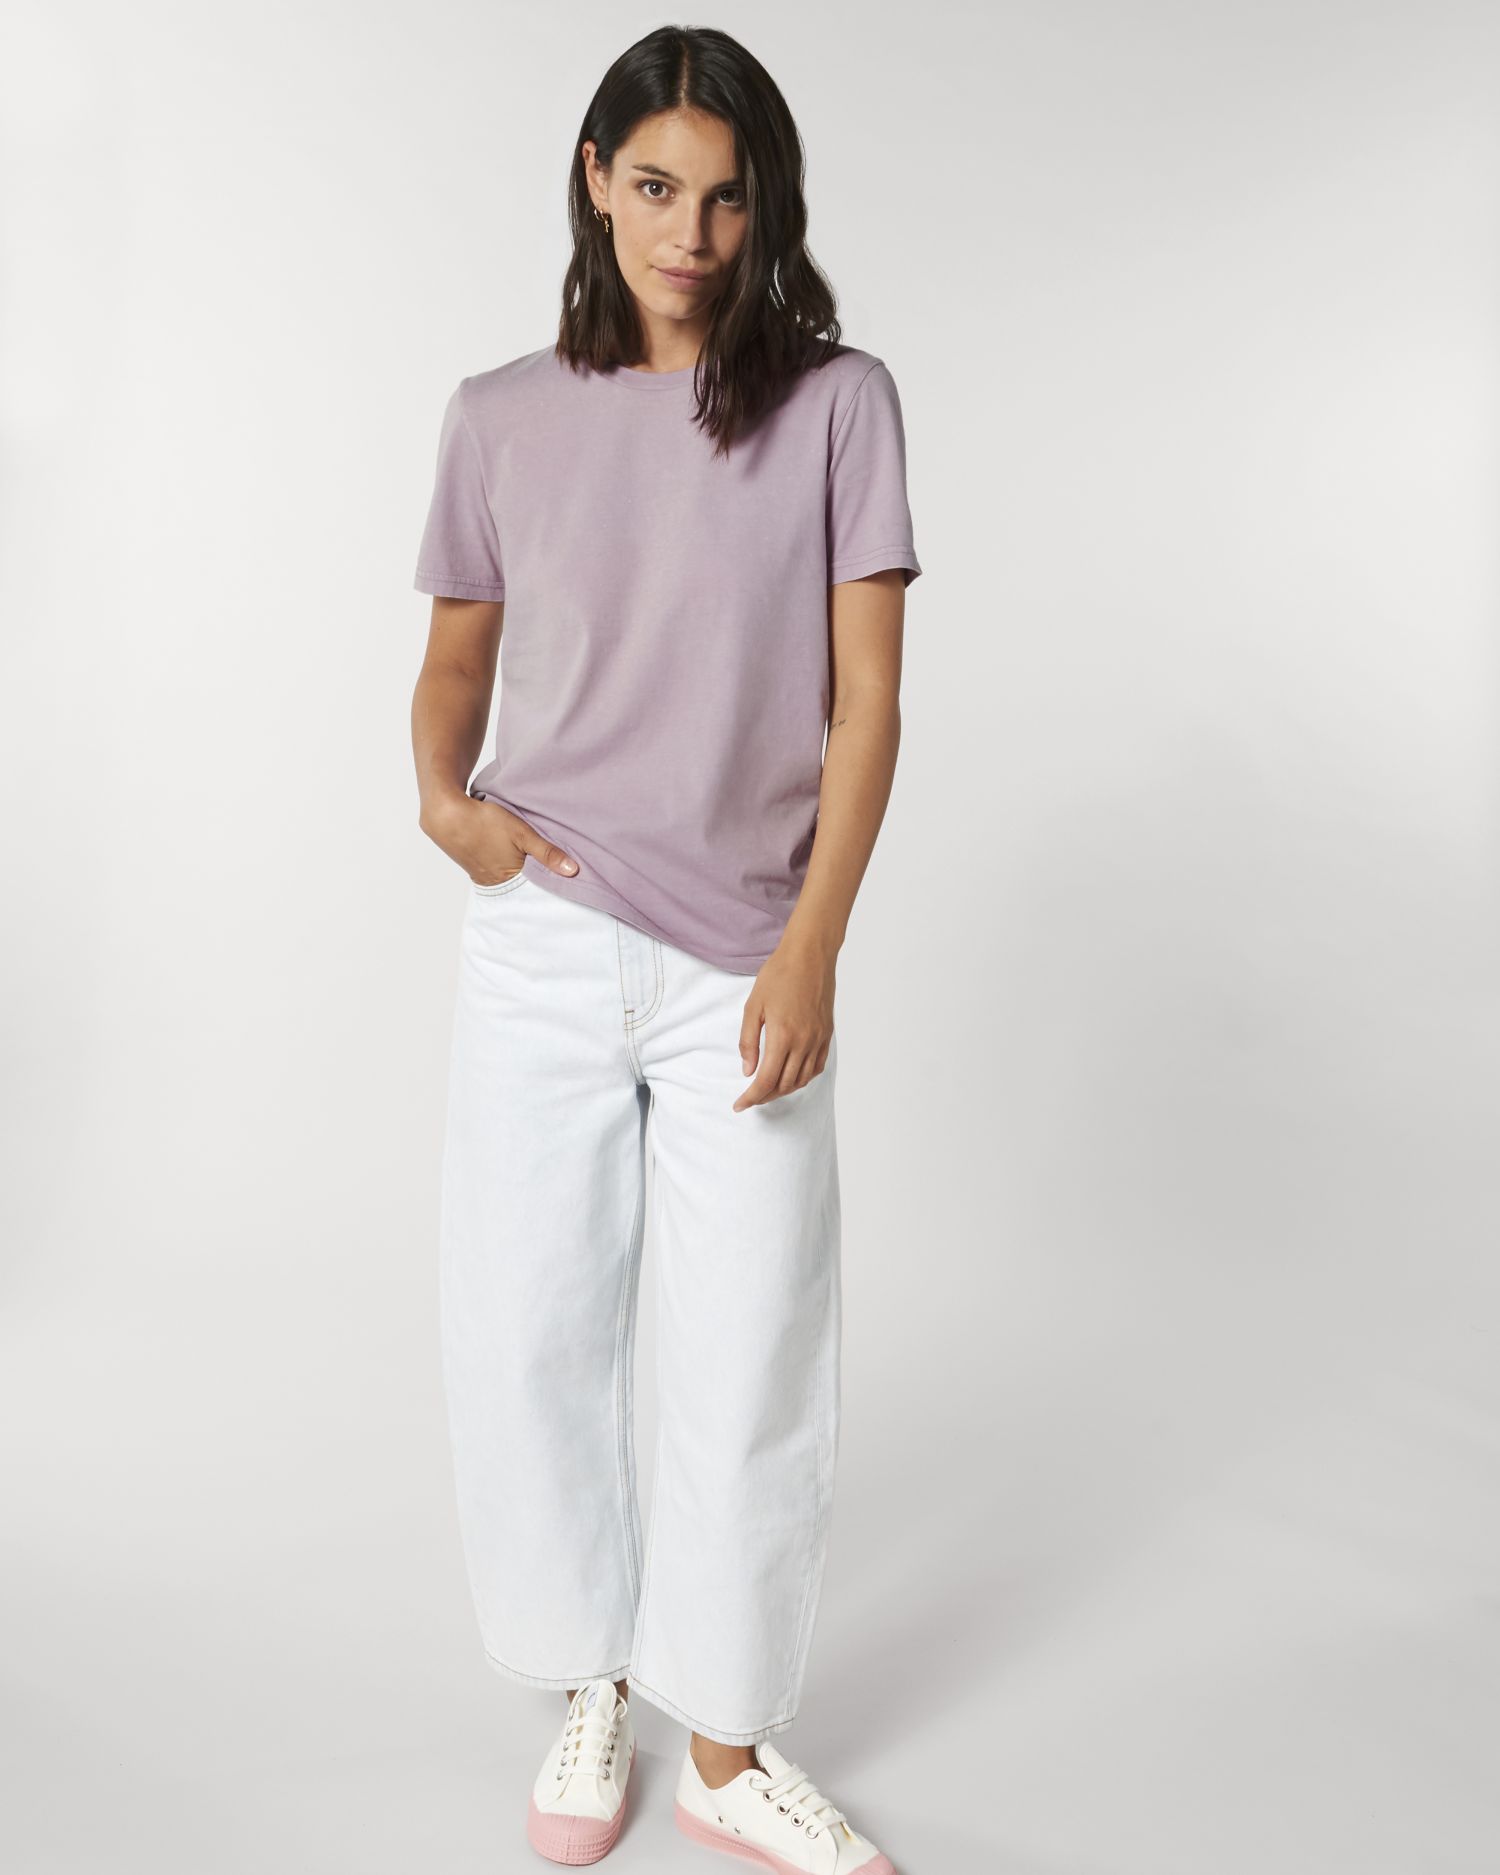 T-Shirt Creator Vintage in Farbe G. Dyed Aged Lilac Petal